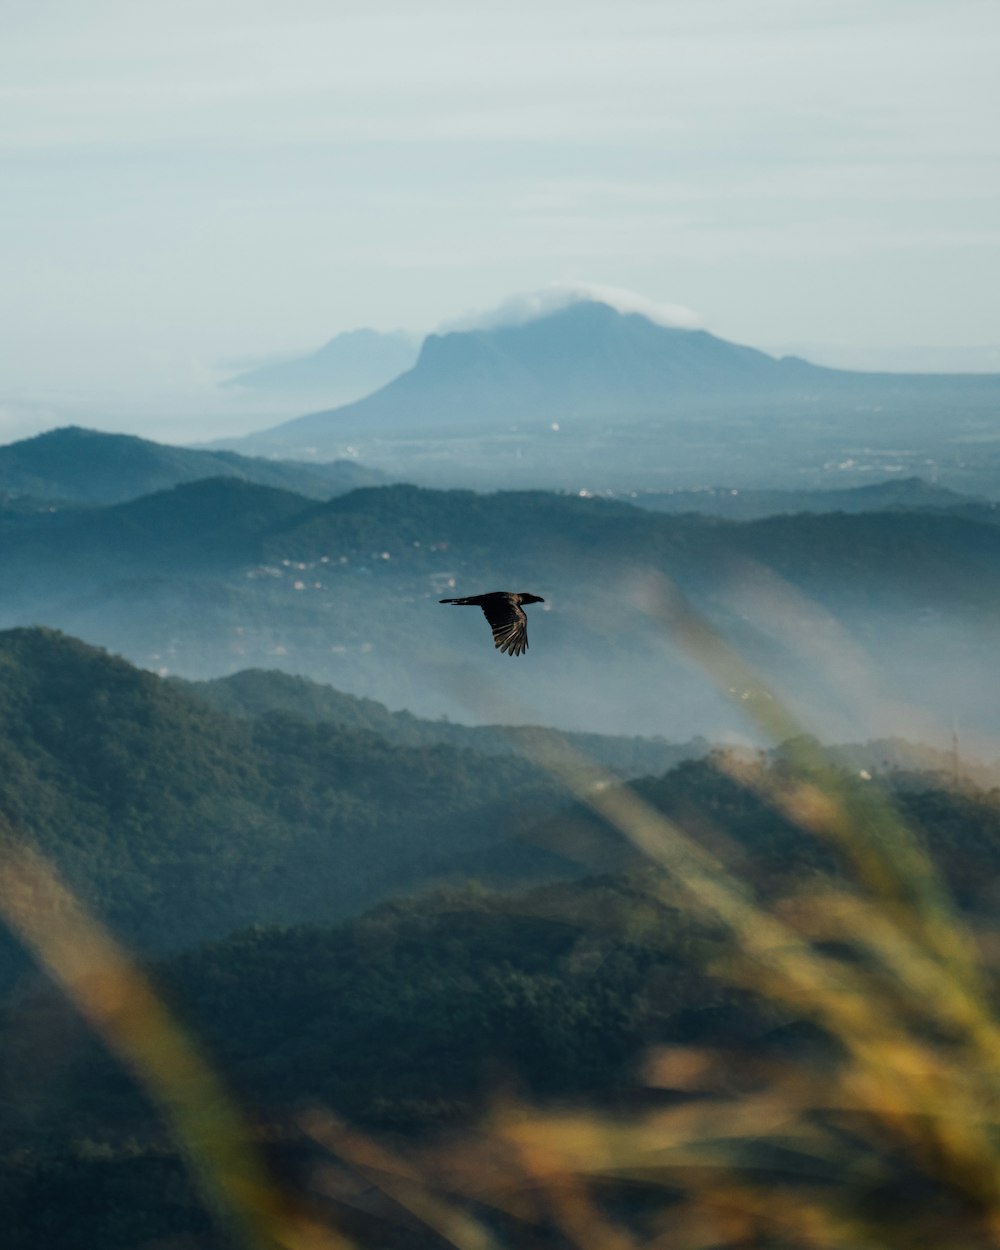 black bird flying over the mountain during daytime